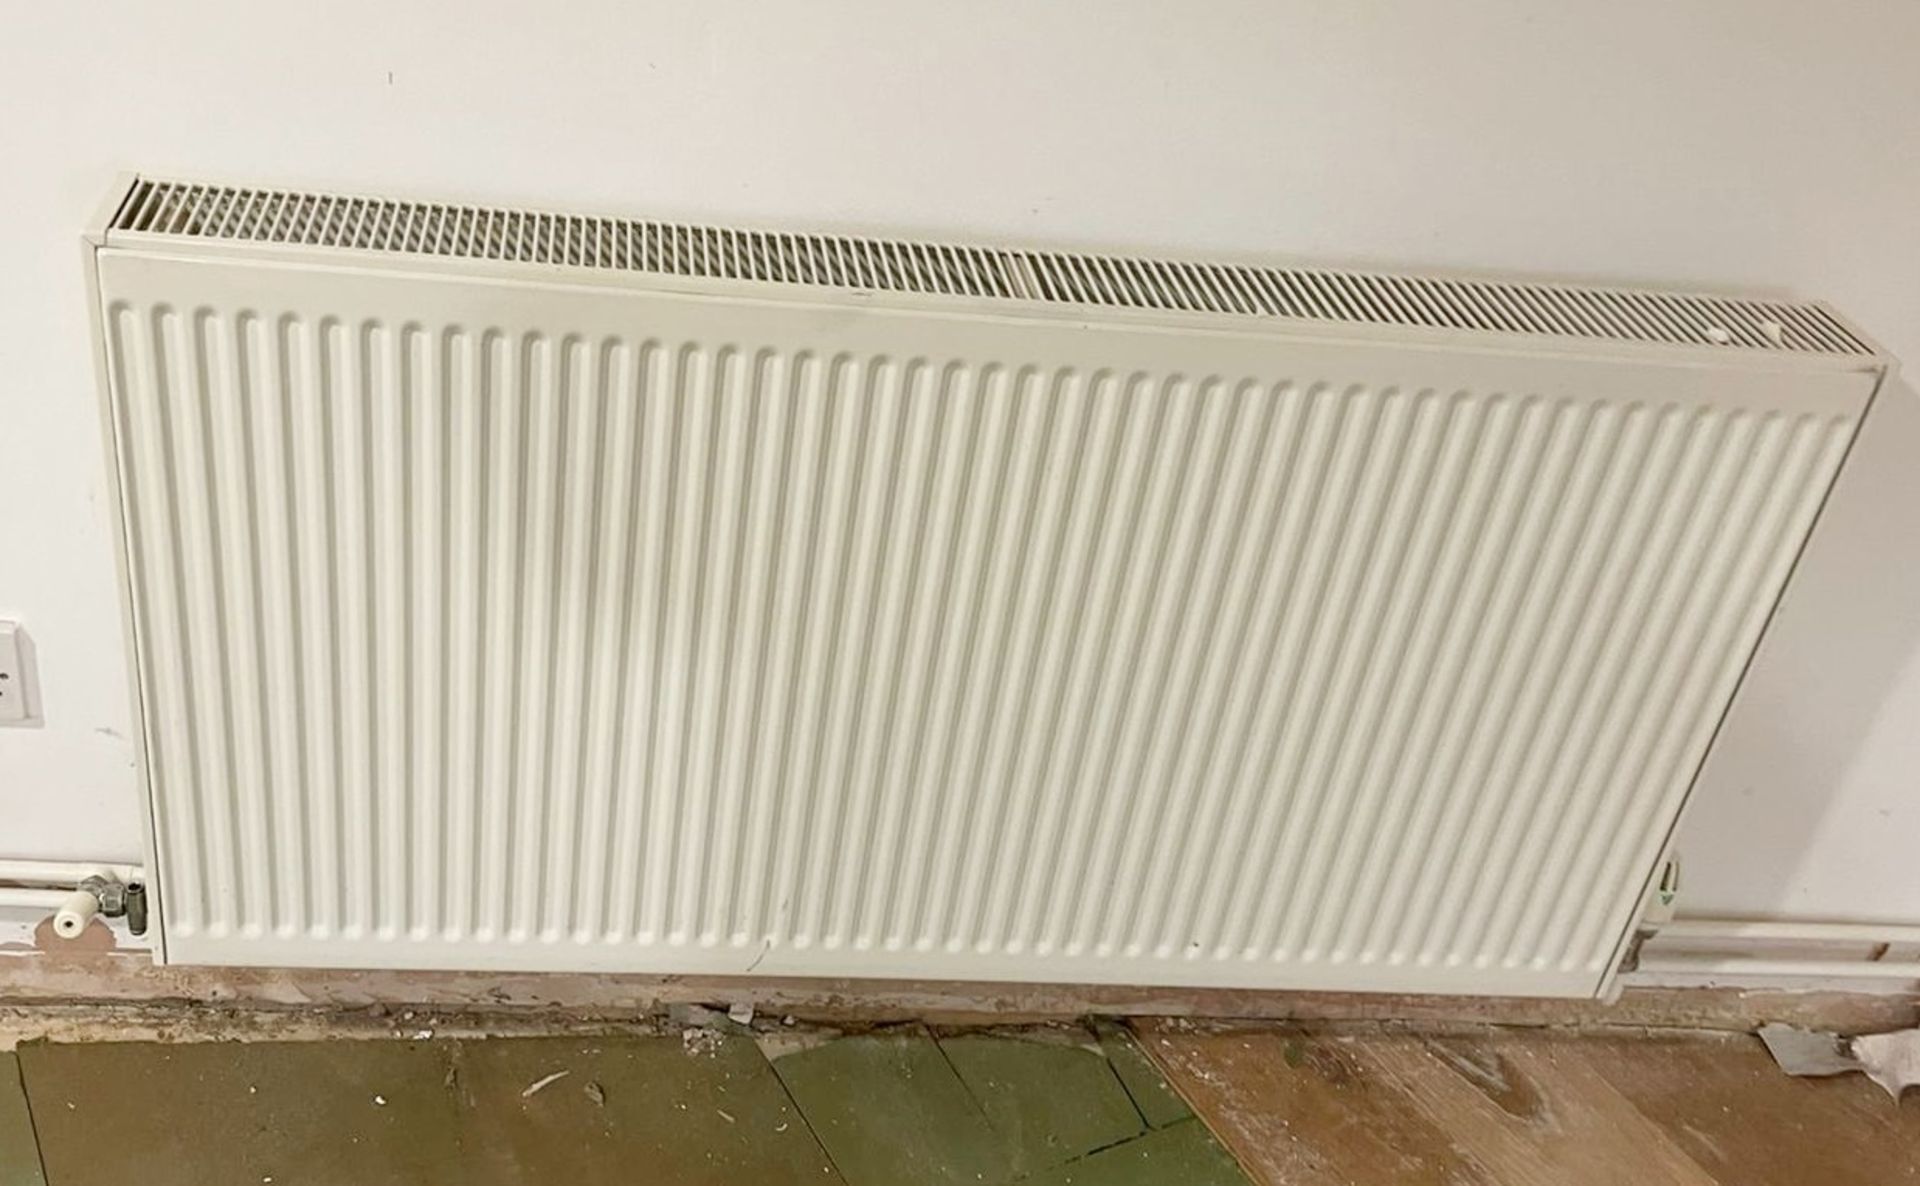 4 x Central Heating Radiators 120(W) x 60cm(H) - To Be Removed From An Executive Office - Image 2 of 3